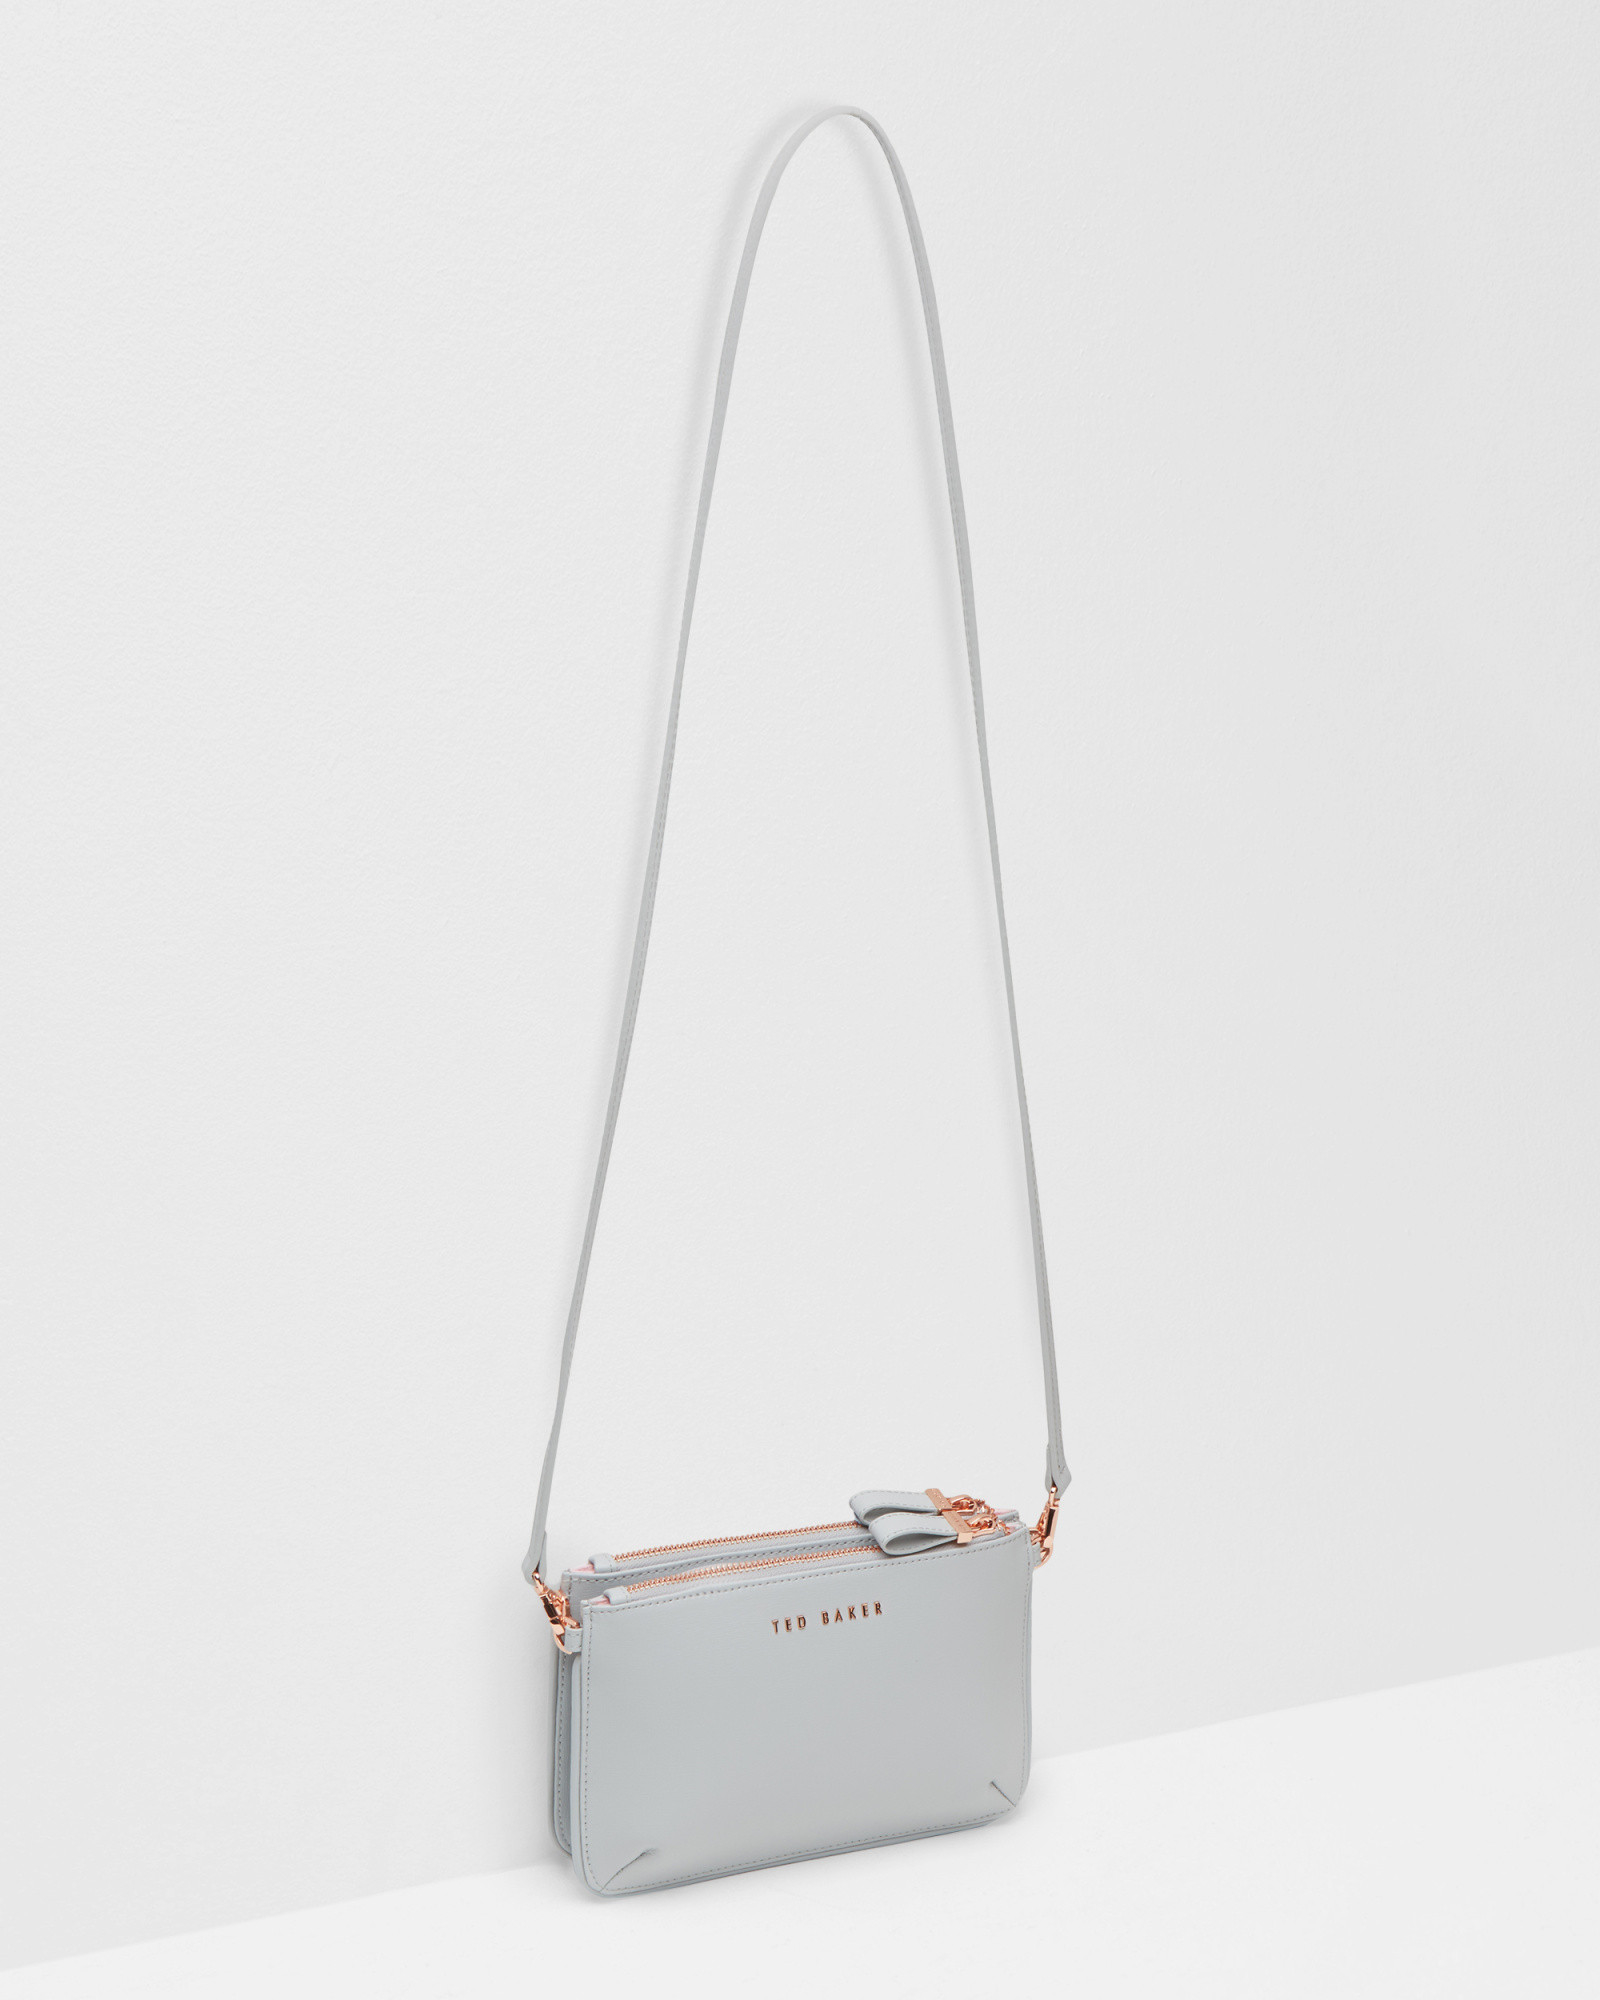 Lyst - Ted Baker Encyclopaedia Floral Leather Cross Body Bag in White